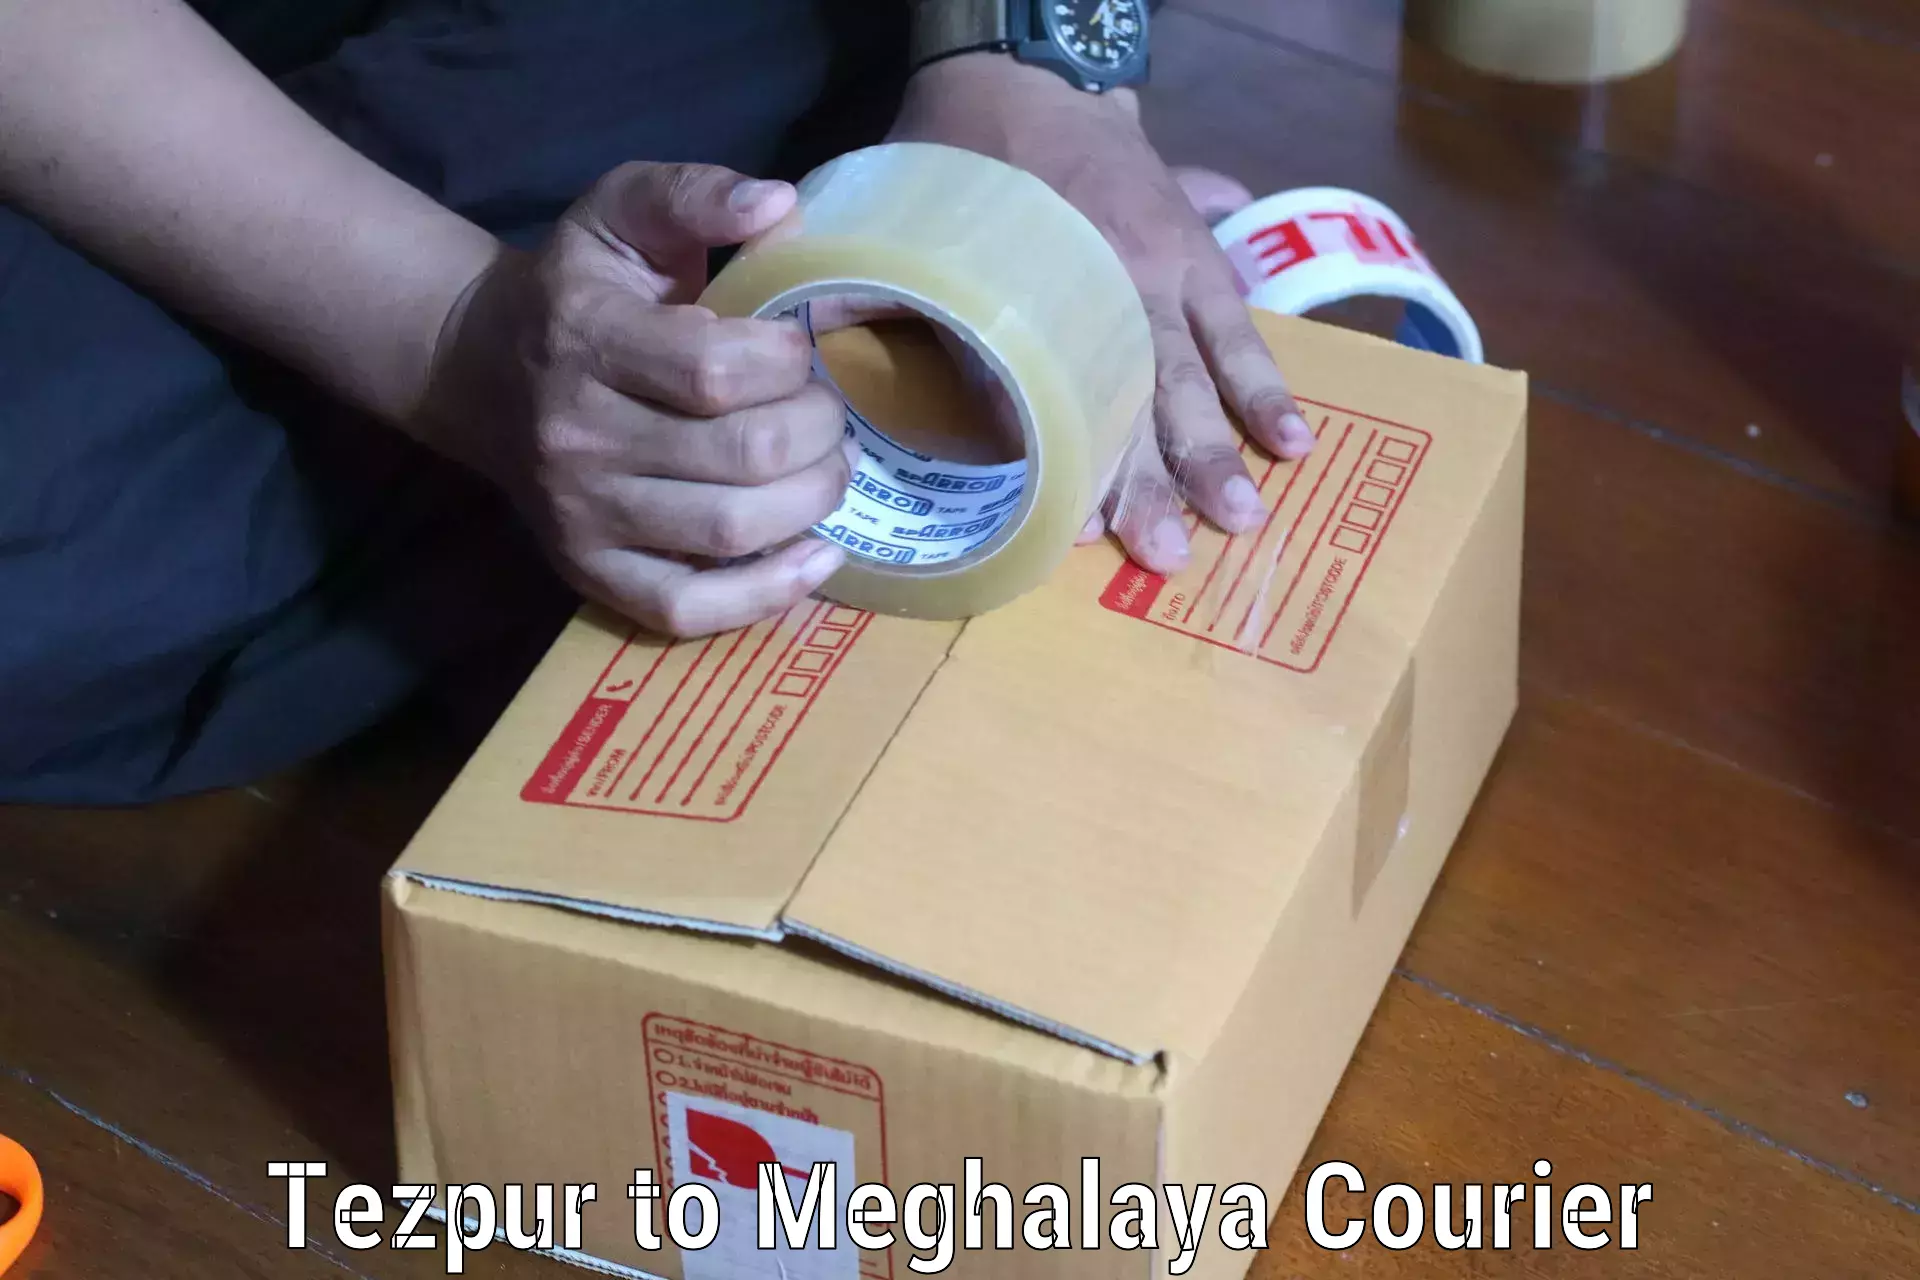 Local delivery service Tezpur to Meghalaya